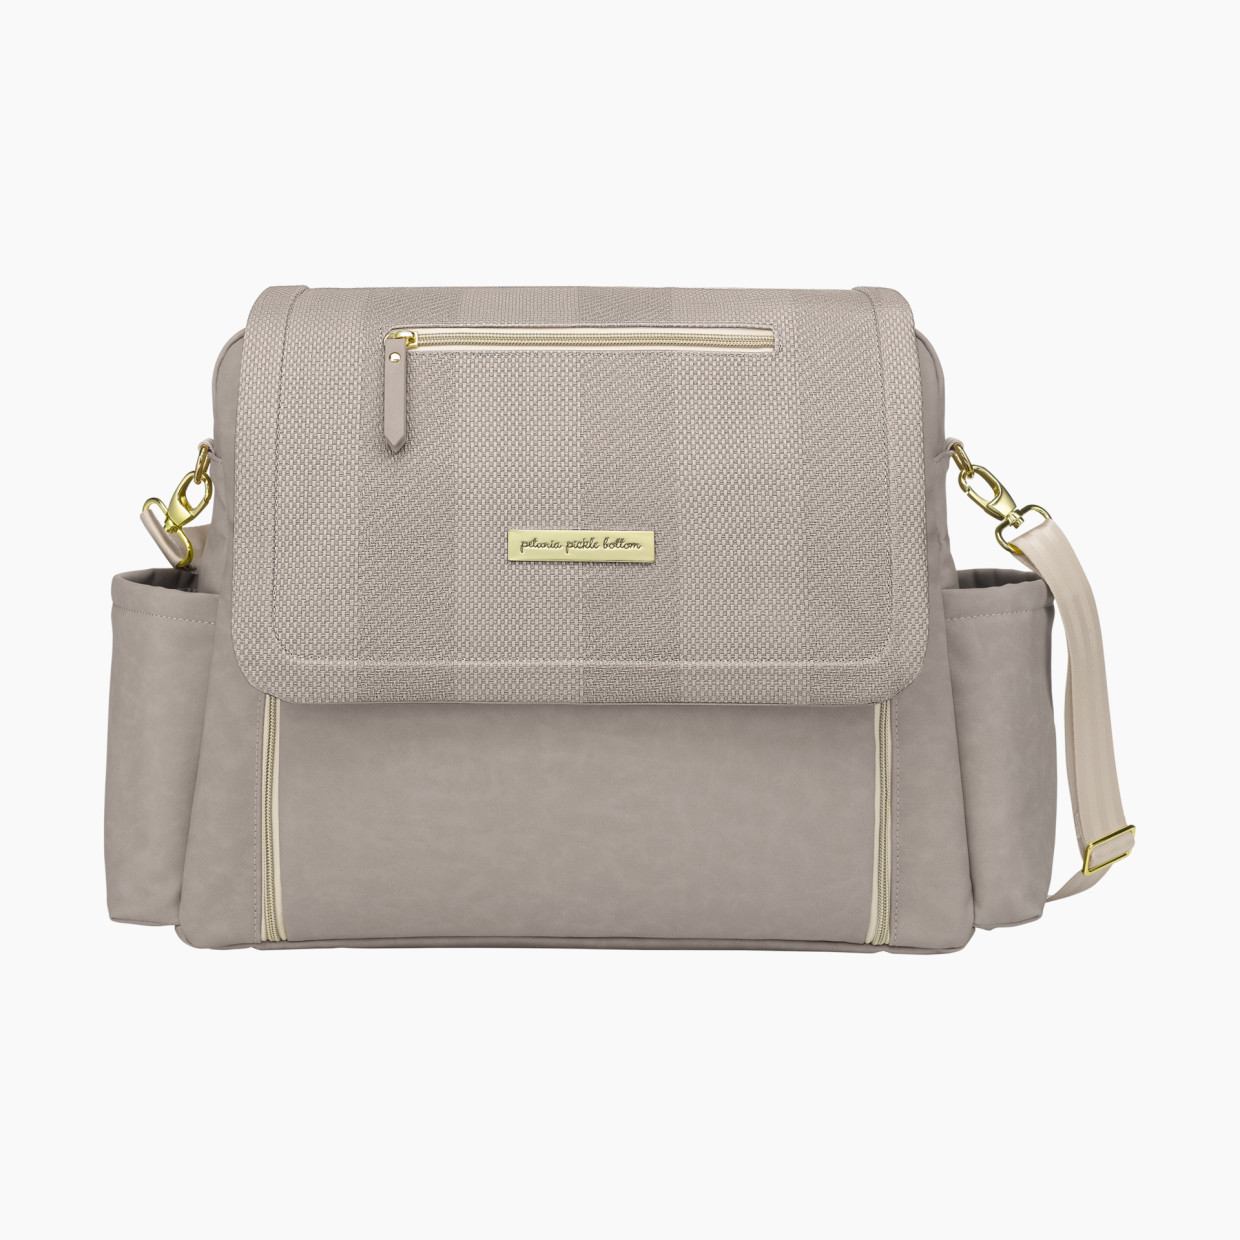 Petunia Pickle Bottom Boxy Backpack Deluxe - Sand Cable Stitch.